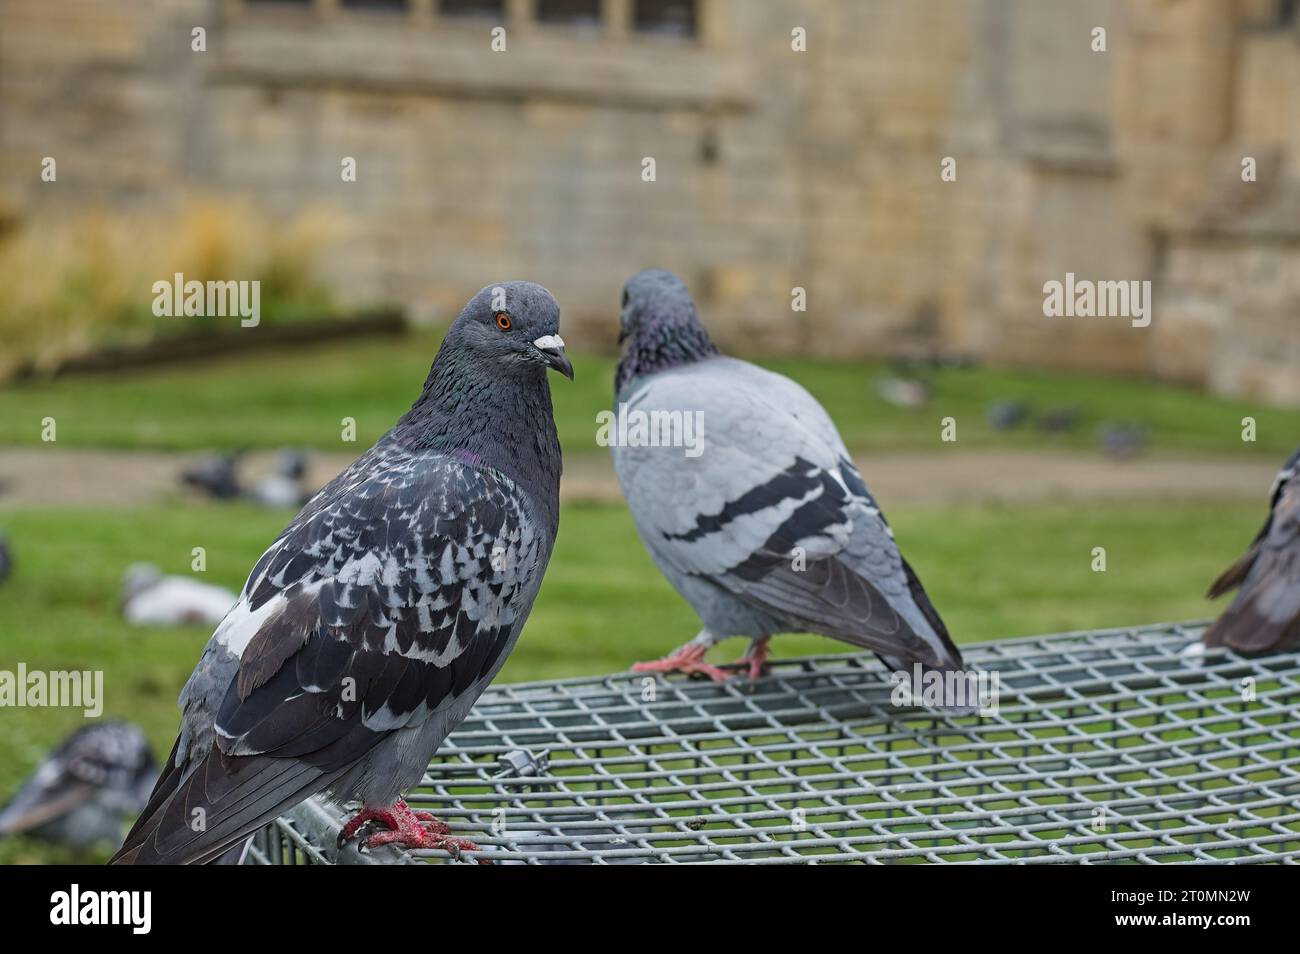 Close-up of a grey pigeon with defocused pigeons in the background Stock Photo